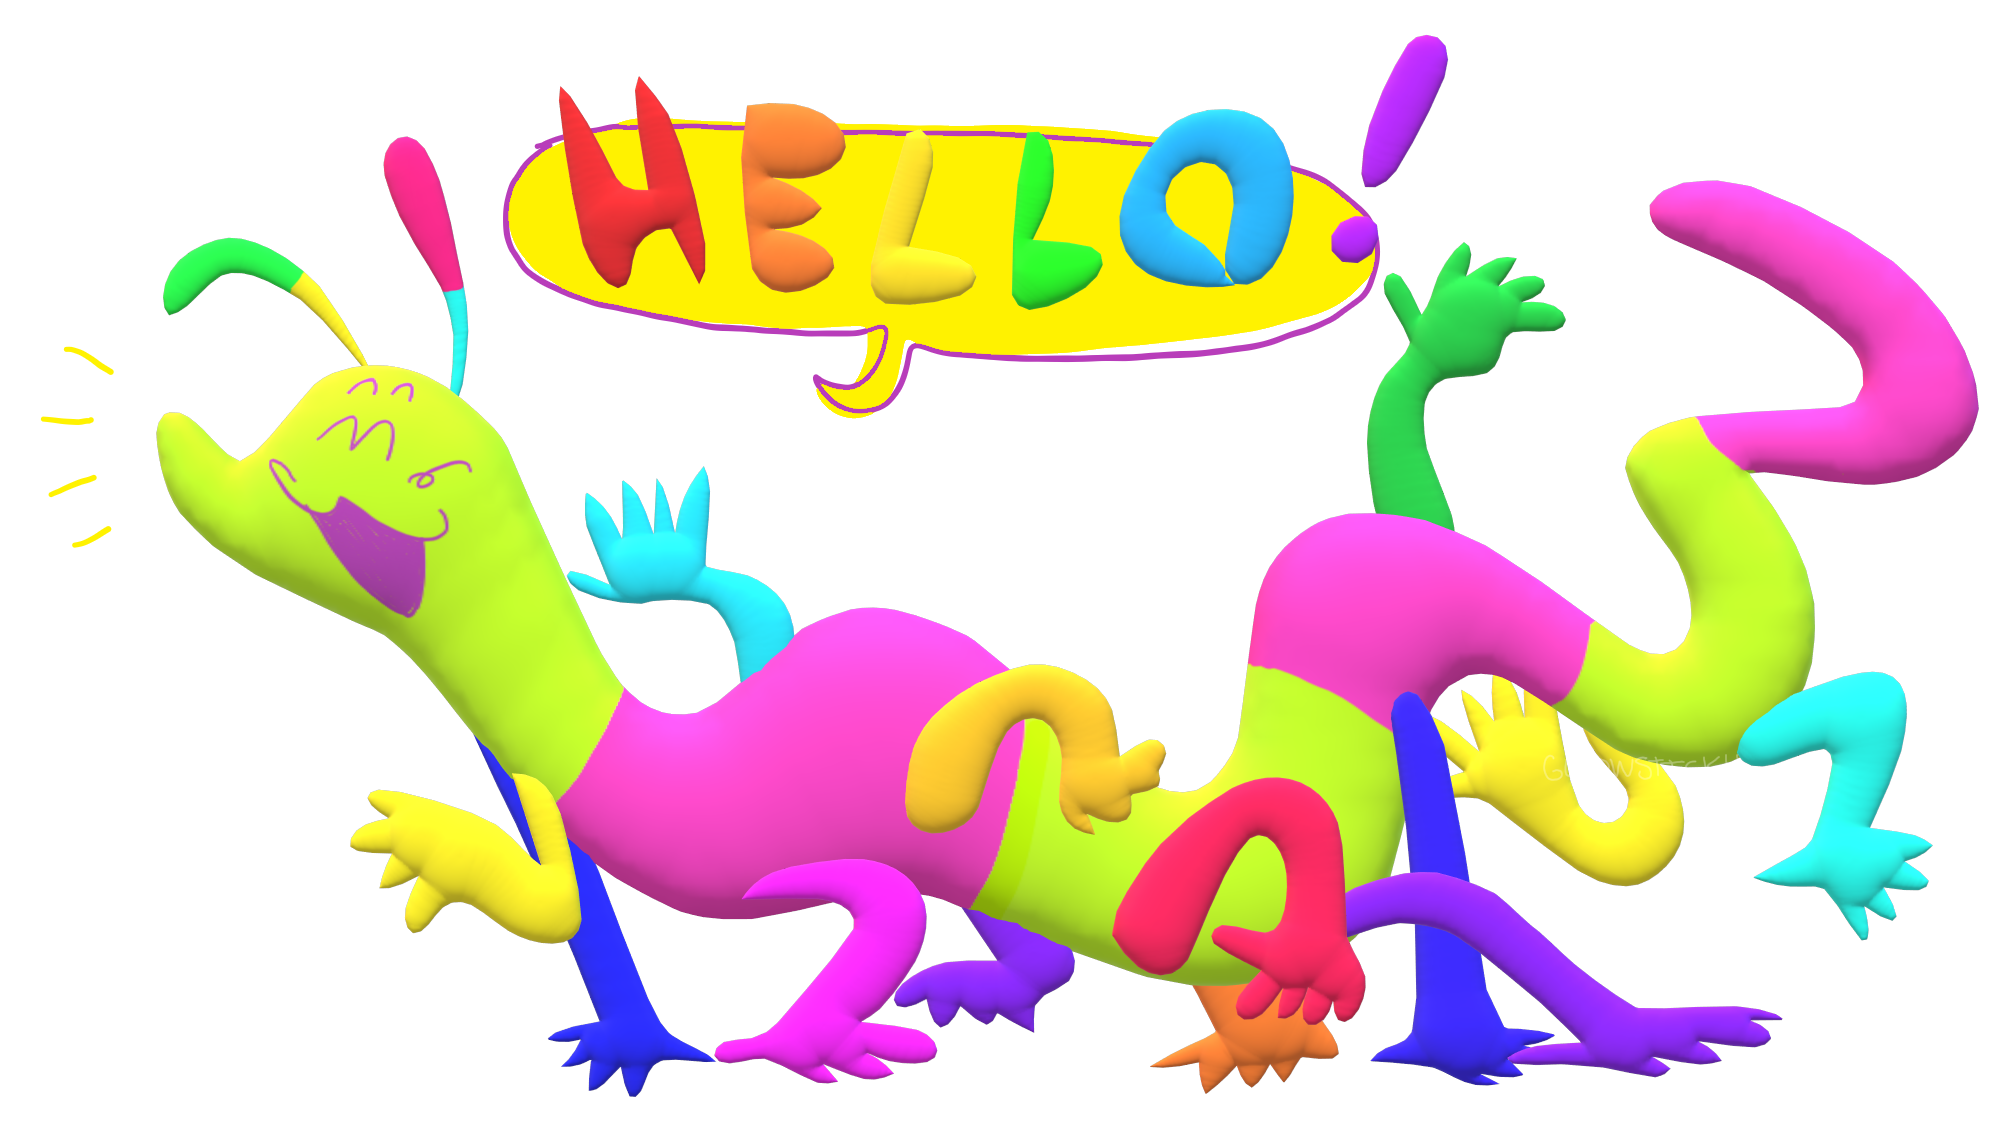 A Paint 3D transparent render of a gummy worm character with a green and pink striped body and multicolored arms sticking out across their body. They are smiling and facing to the left, and have a speech bubble that says 'Hello!' in big rainbow block letters.